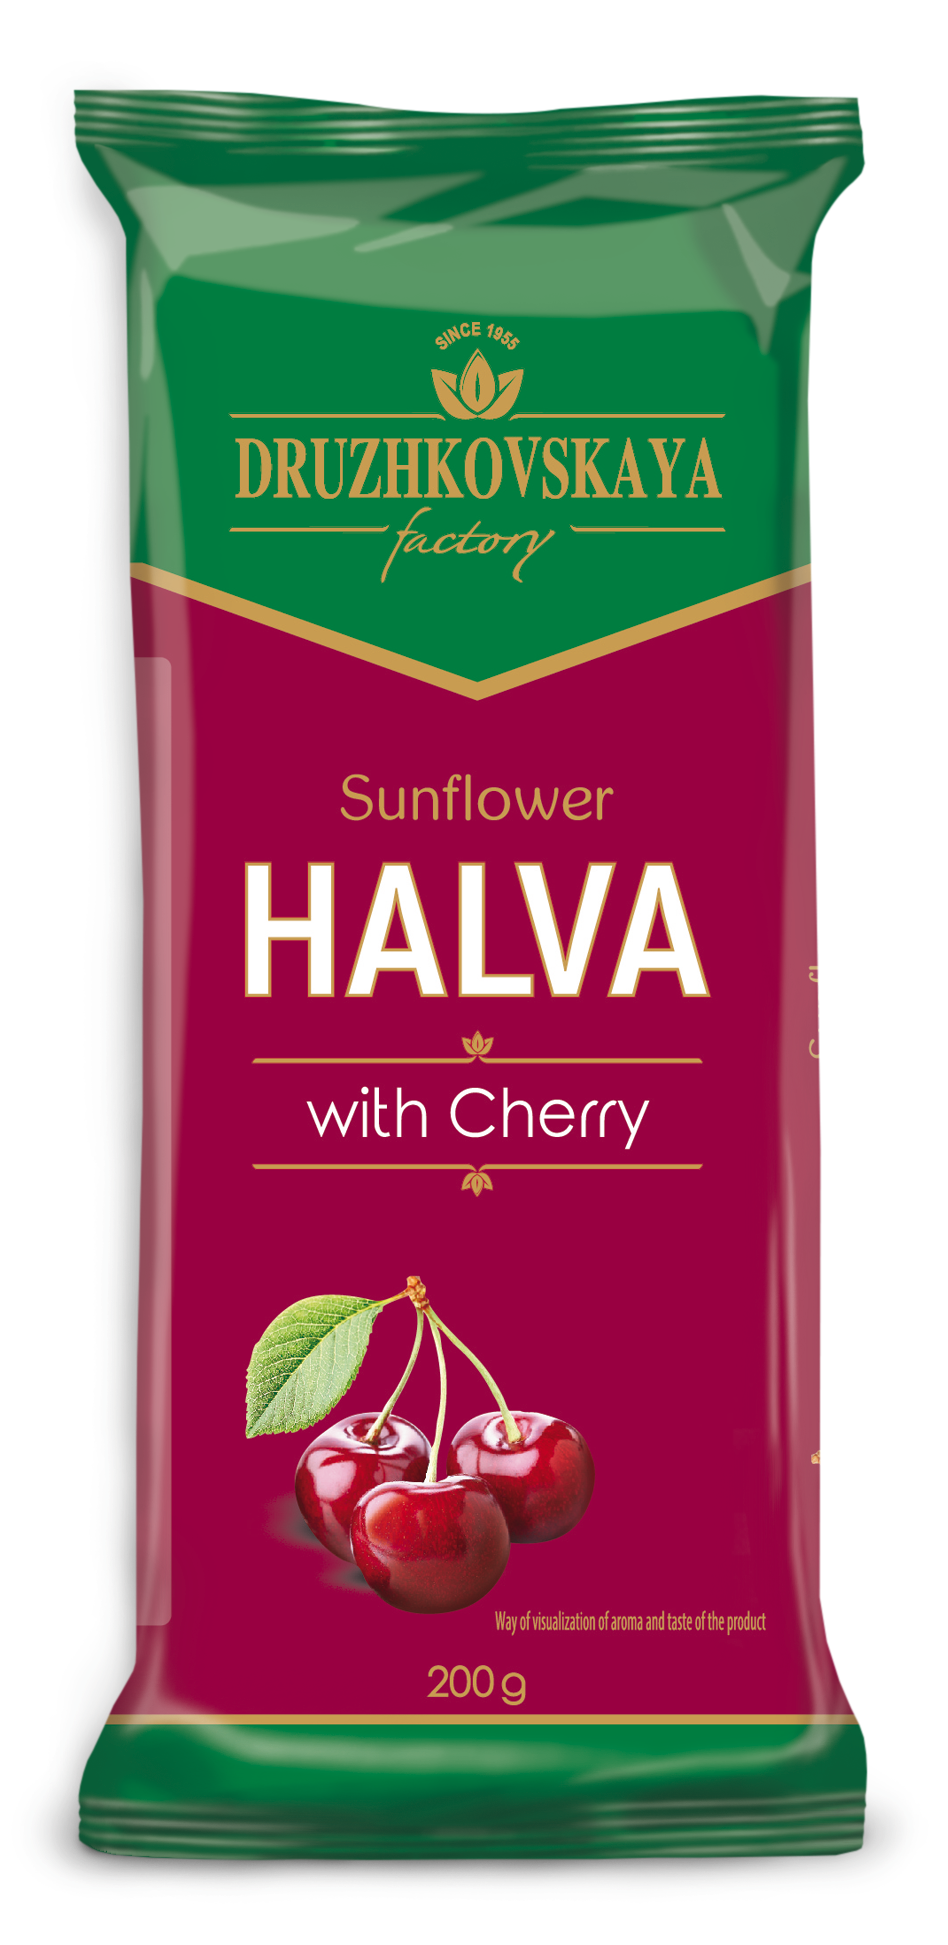 Sunflower Halva with Cherry Packed in Flow-pack, 200 g